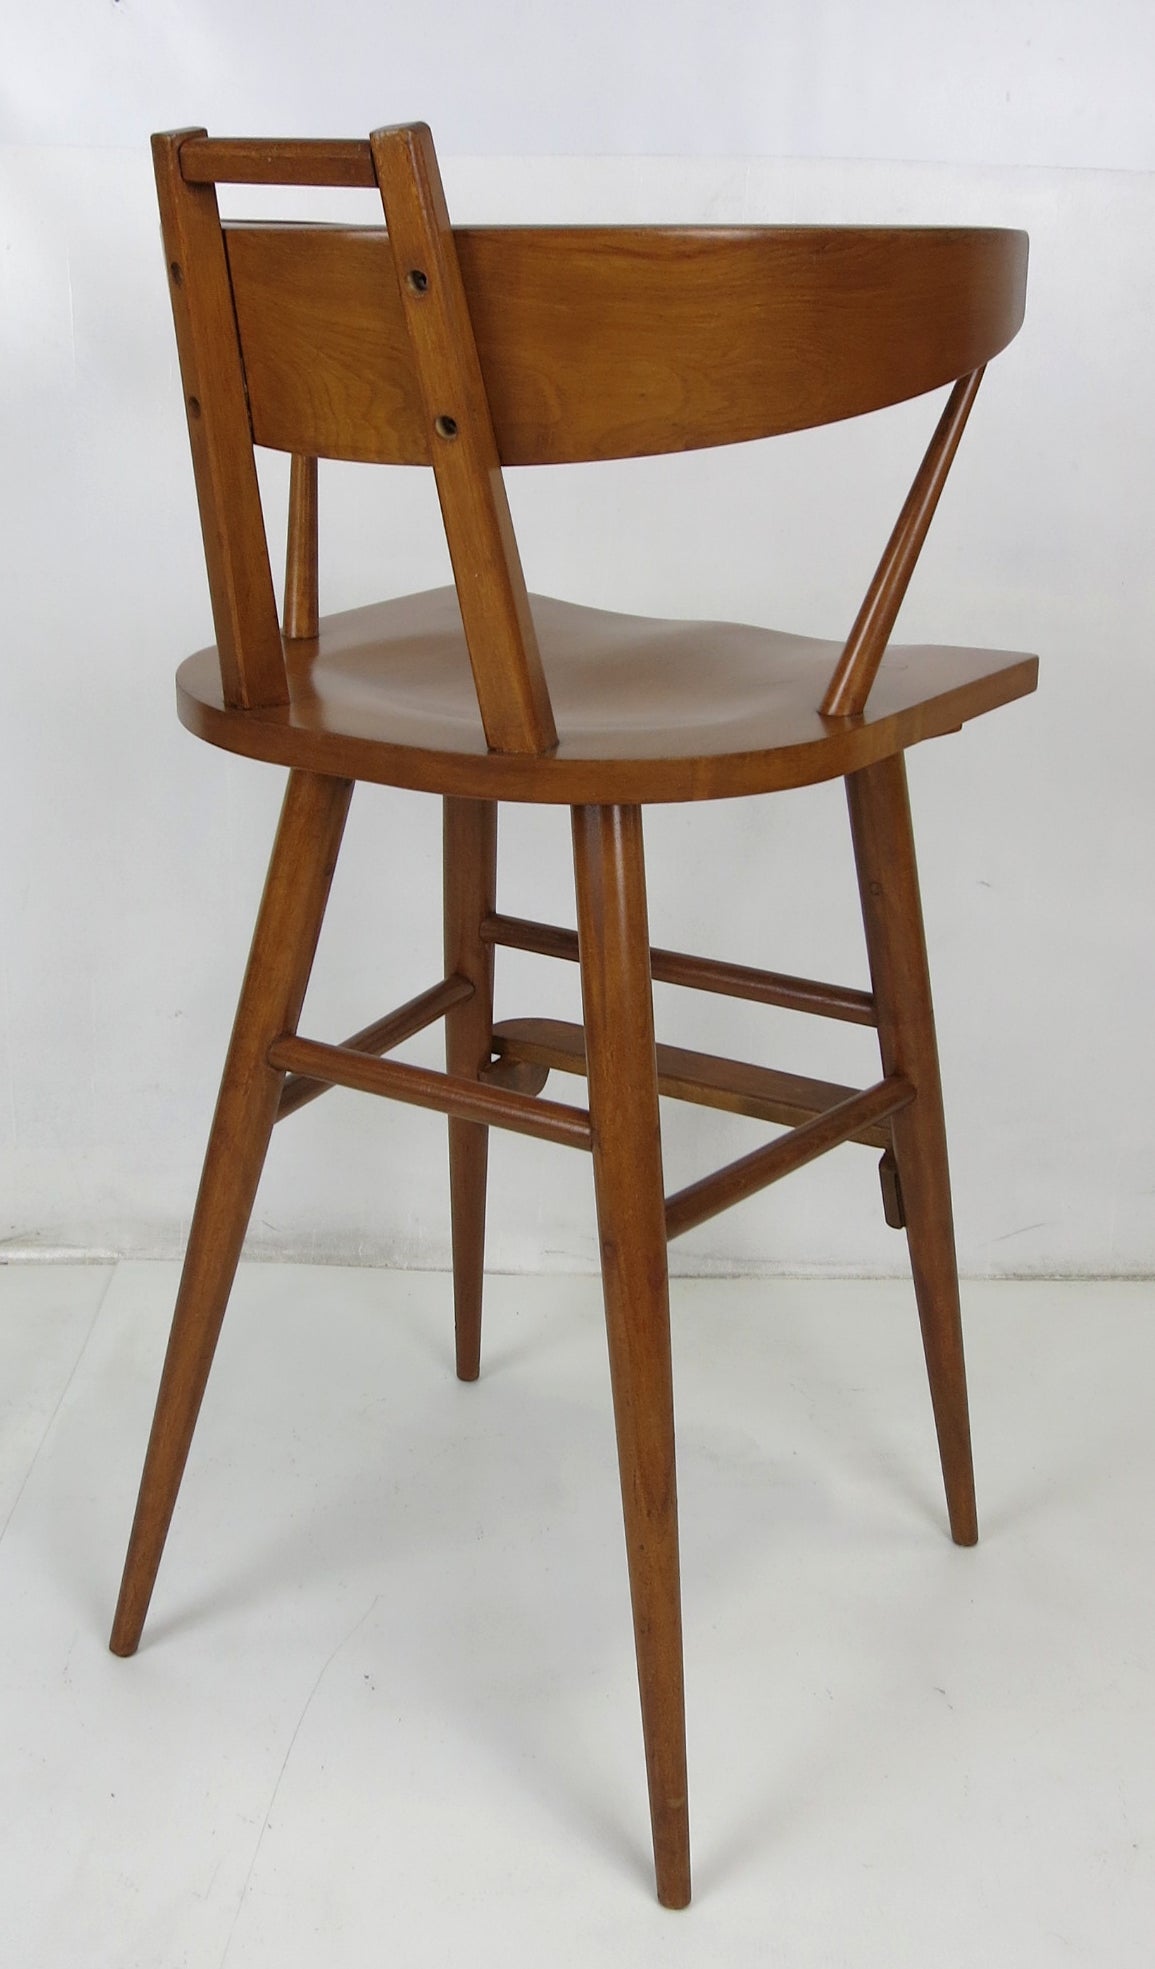 Pair of Mid-Century Modern bar stools in the style of Paul McCobb. The pair have been completely restored; glued up and refinished but left with all of their vintage charm.